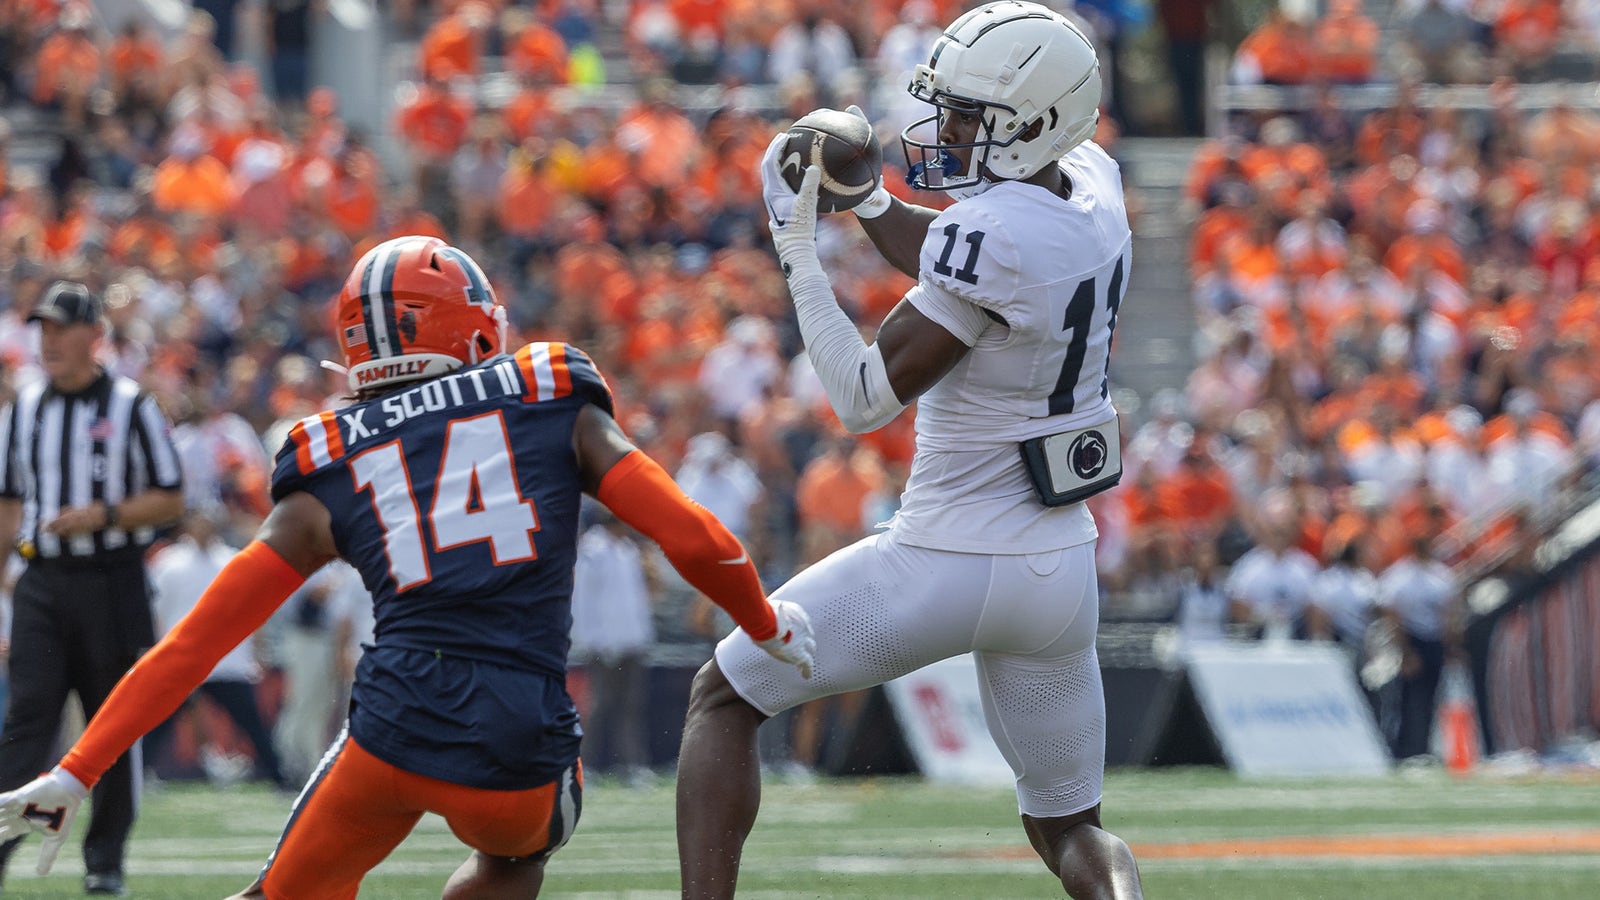 No. 7 Penn State Nittany Lions vs. Illinois Fighting Illini highlights